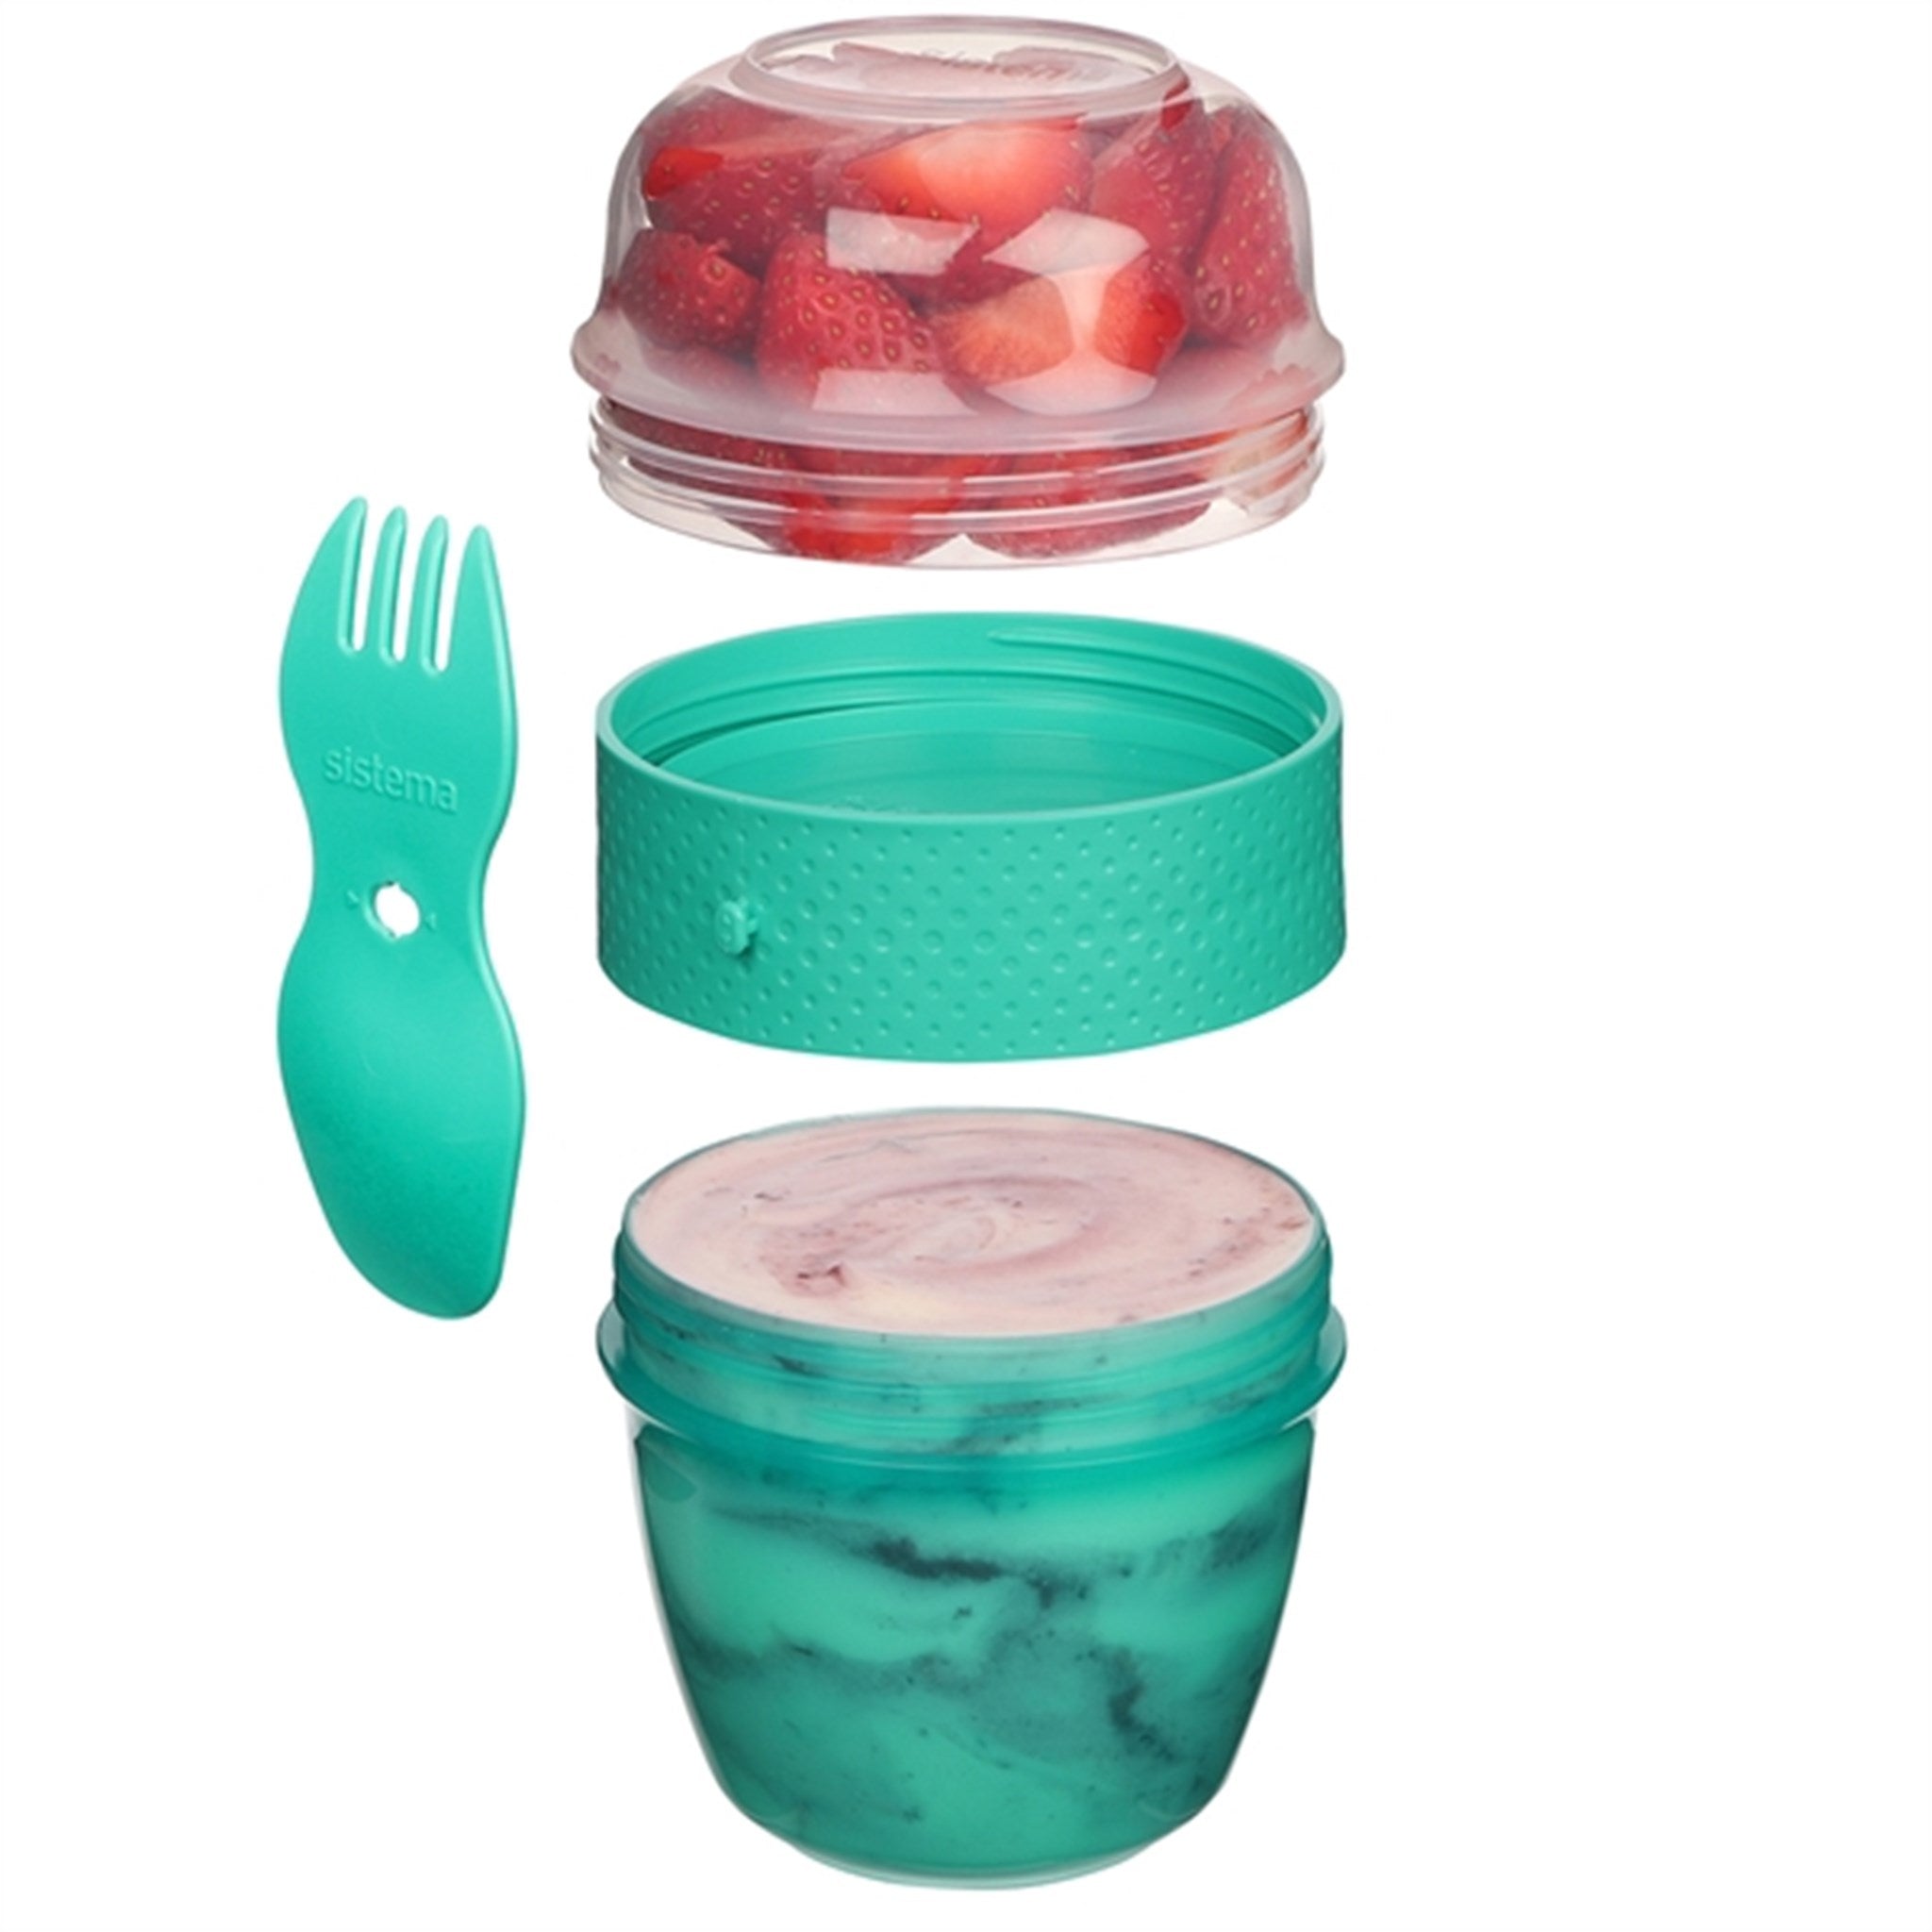 Sistema To Go Snack Capsule Lunch Box 515 ml Minty Teal 2